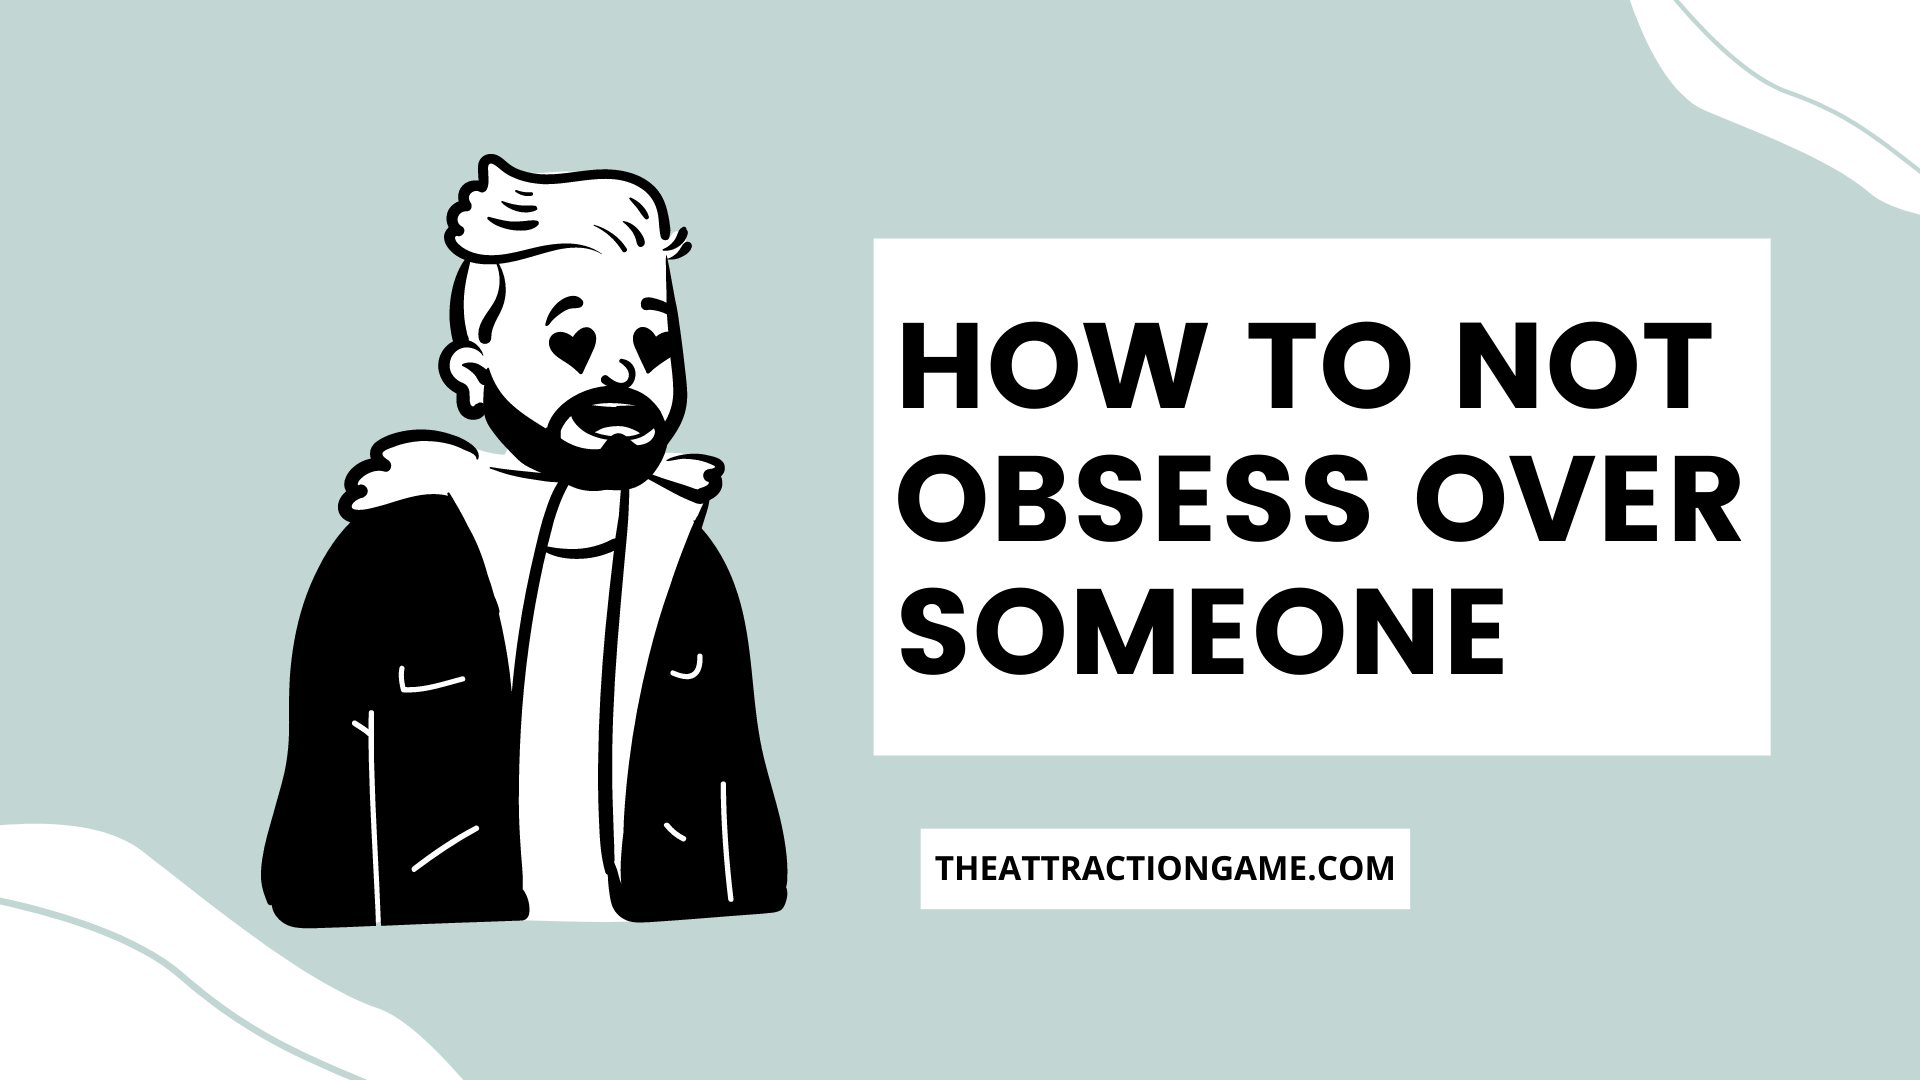 don't obsess over someone, how to not obsess over someone, how to not be obsessed with someone, obsessing over someone